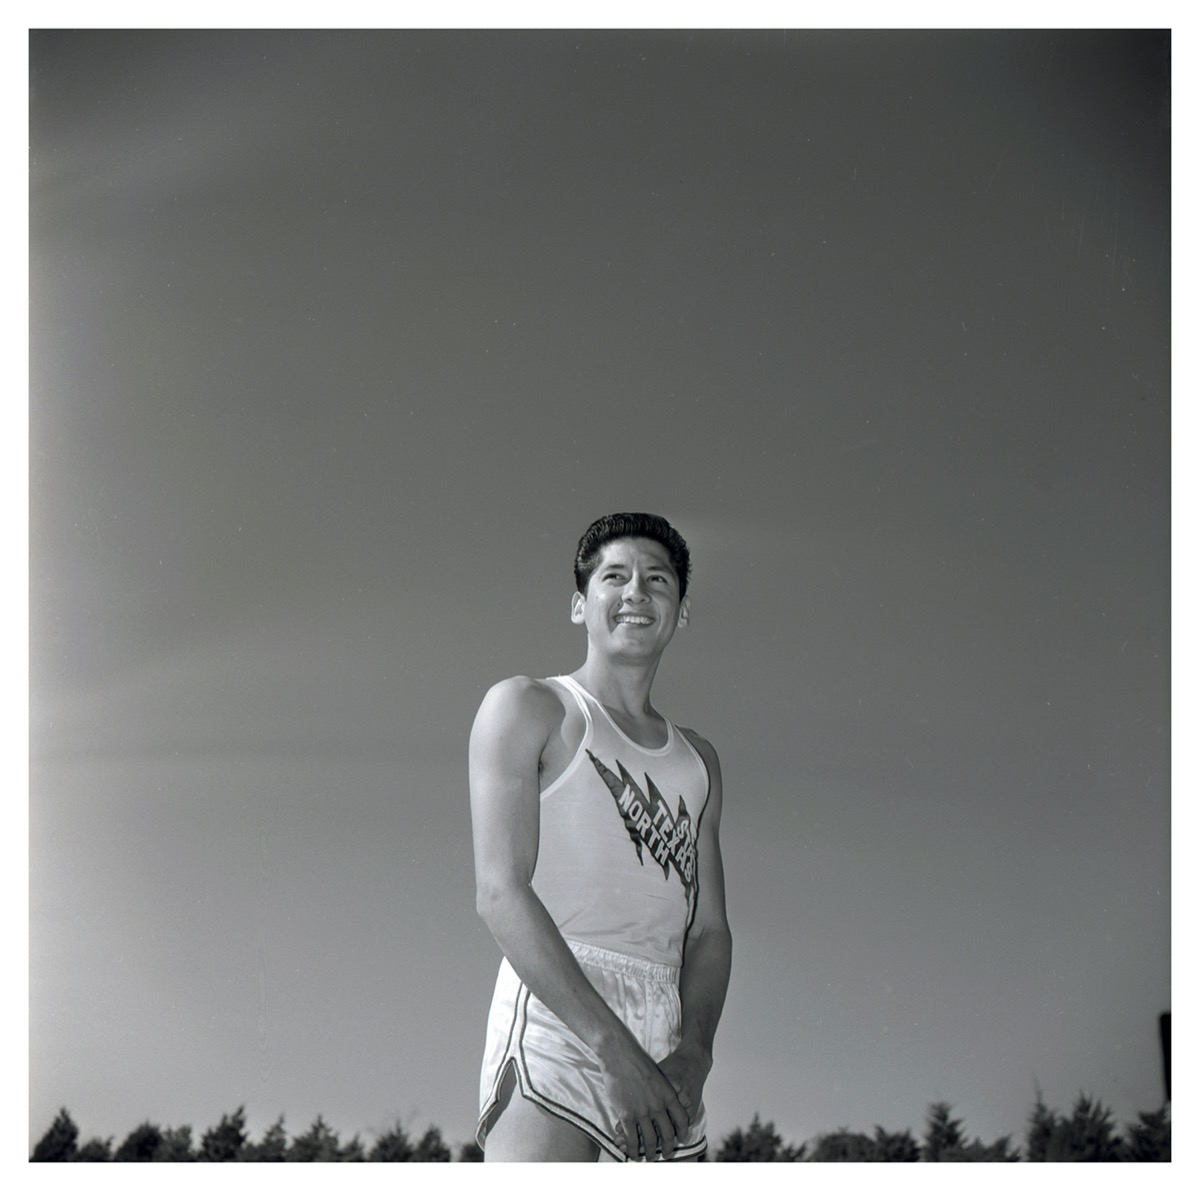 Black and white photo of a man in short white shirts and a white tank top with the words North Texas on it. He is seen from the upper leg up with the clear sky seen behind him.